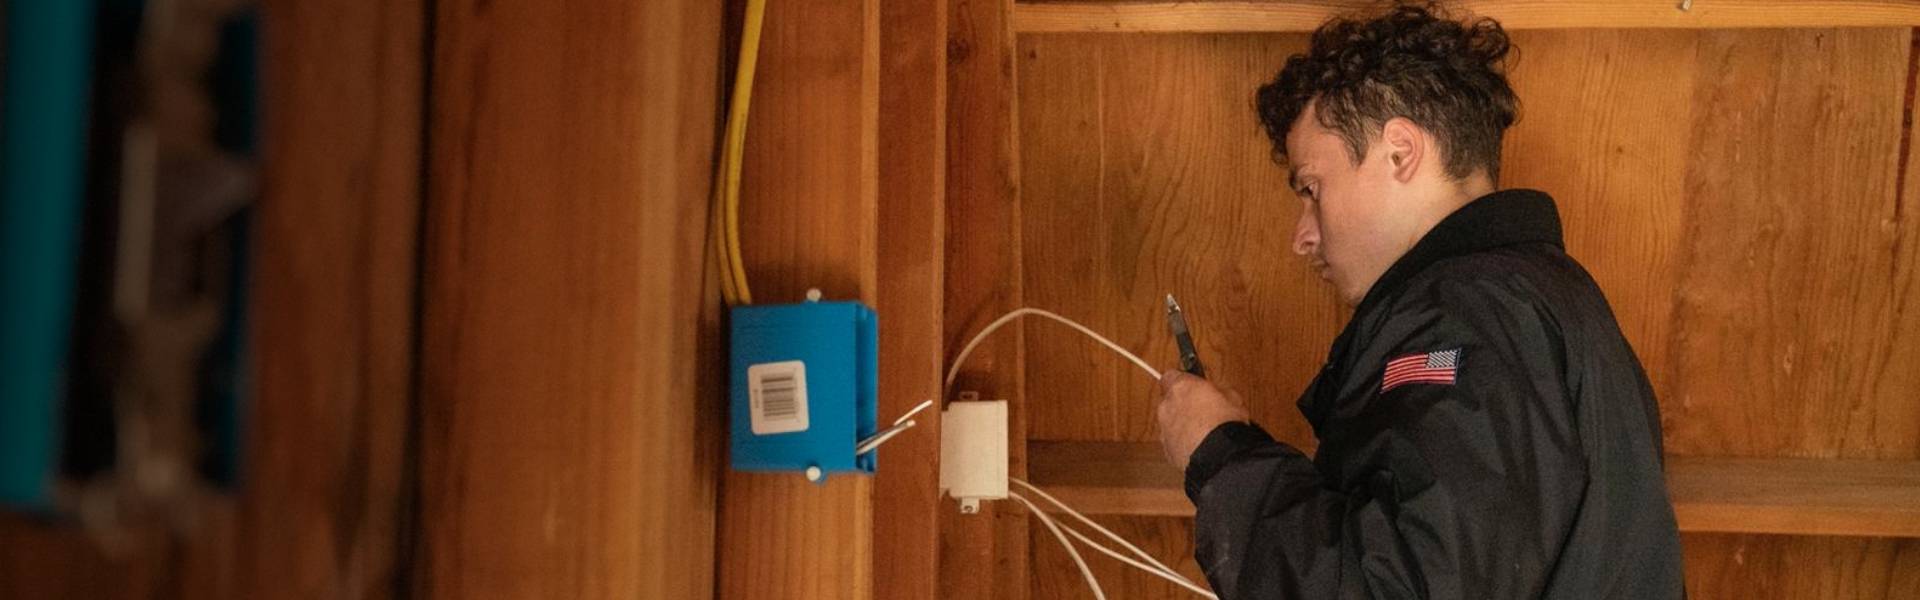 quality electrician in oakland ca